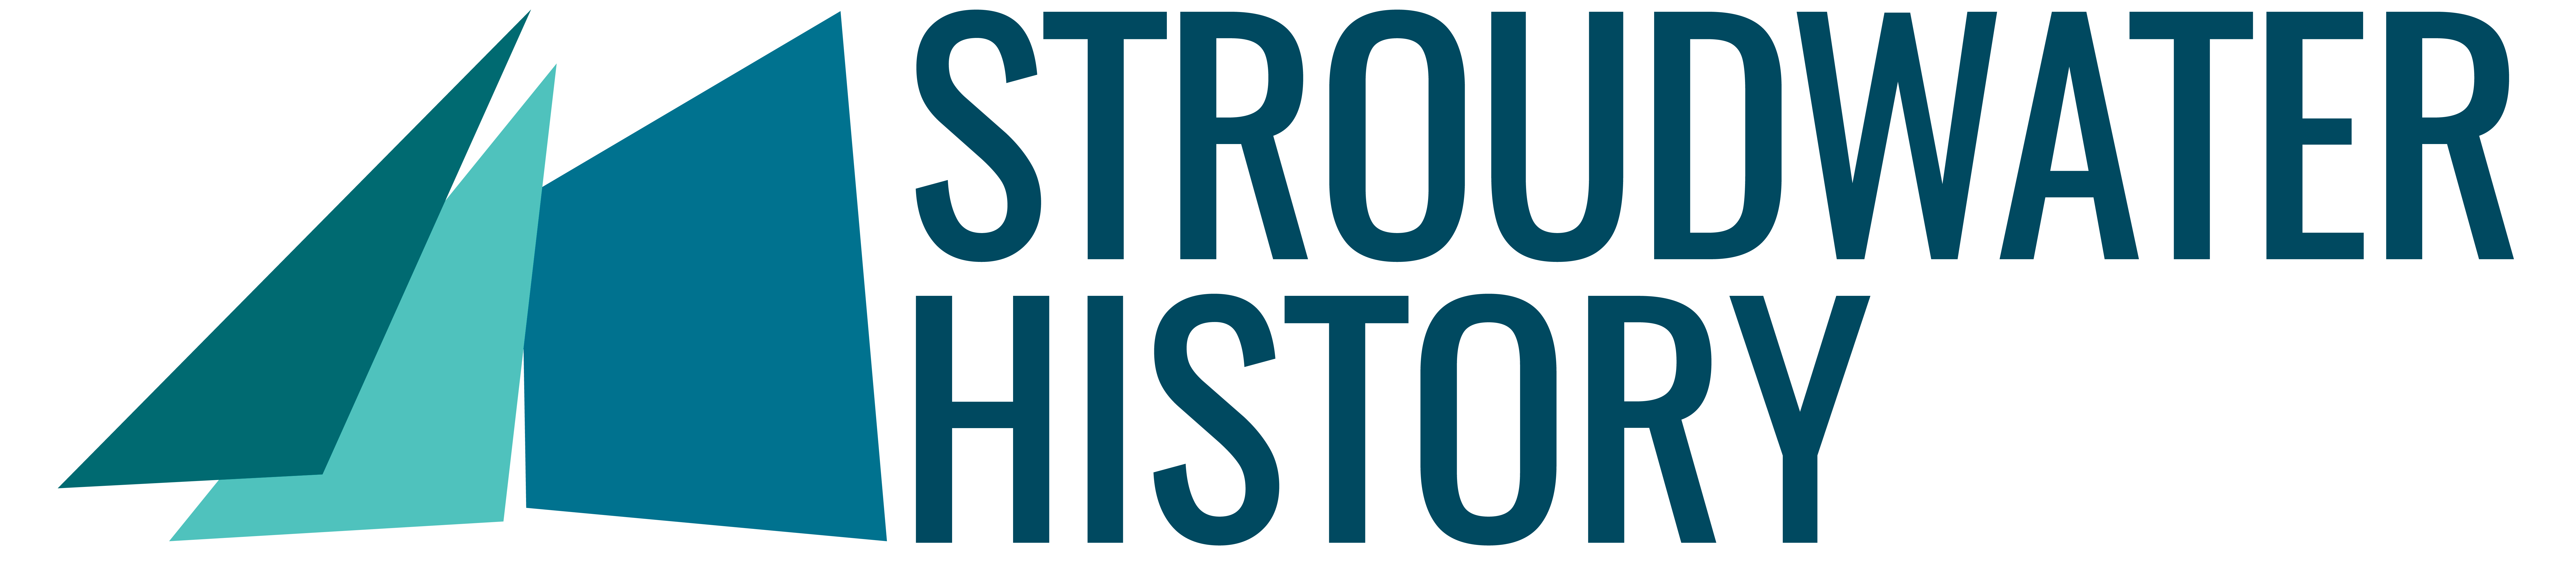 Stroudwater History logo